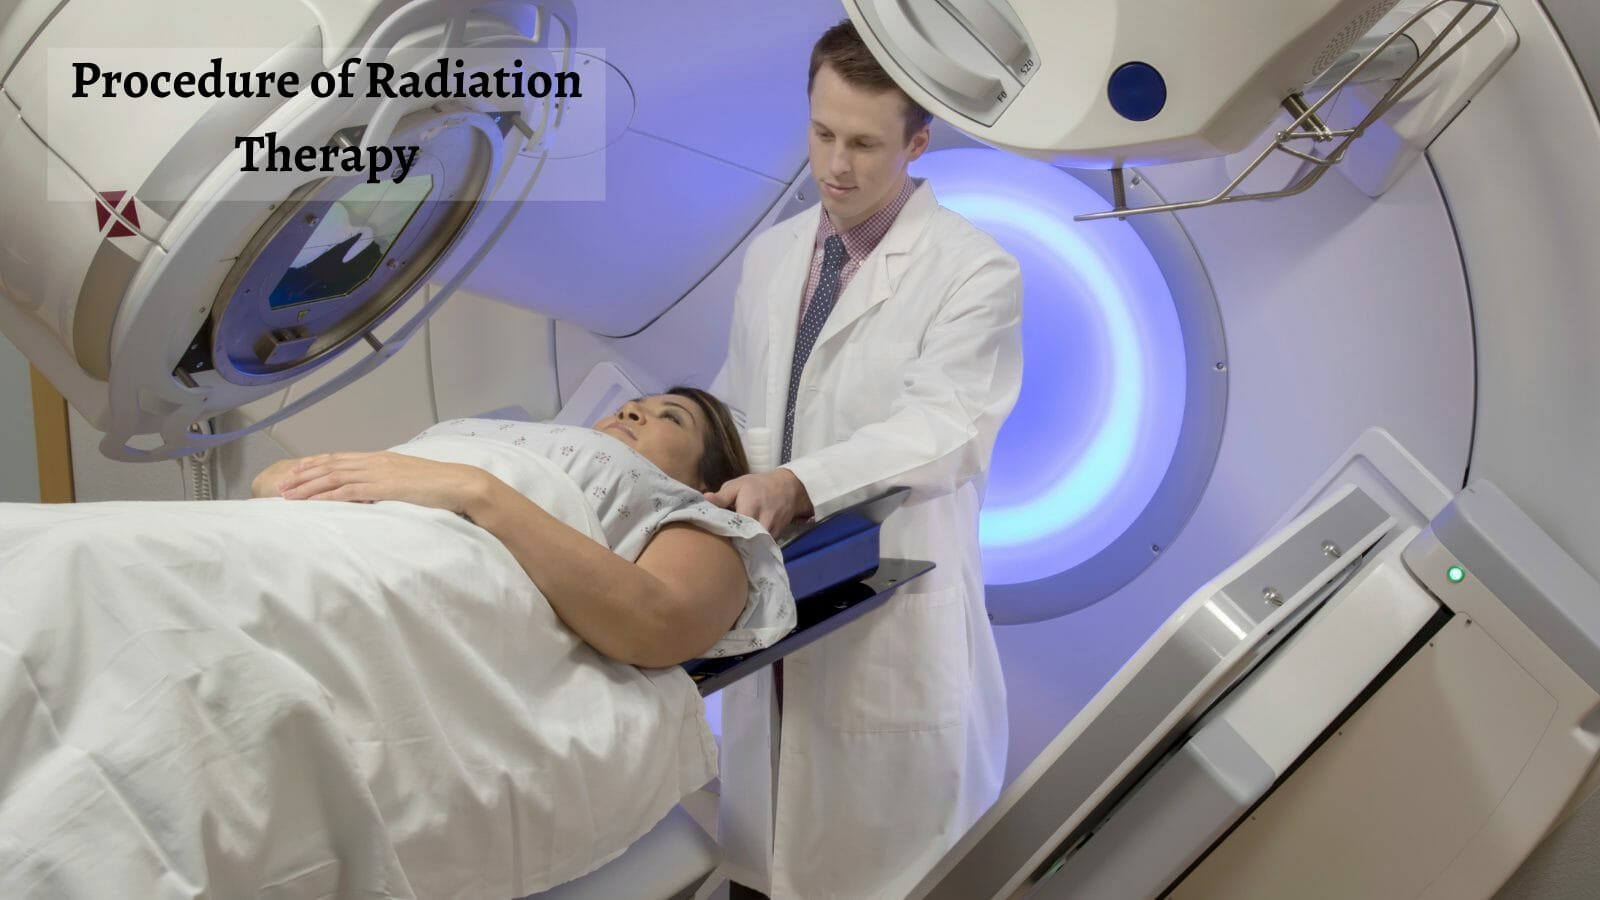 Procedure of Radiation Therapy